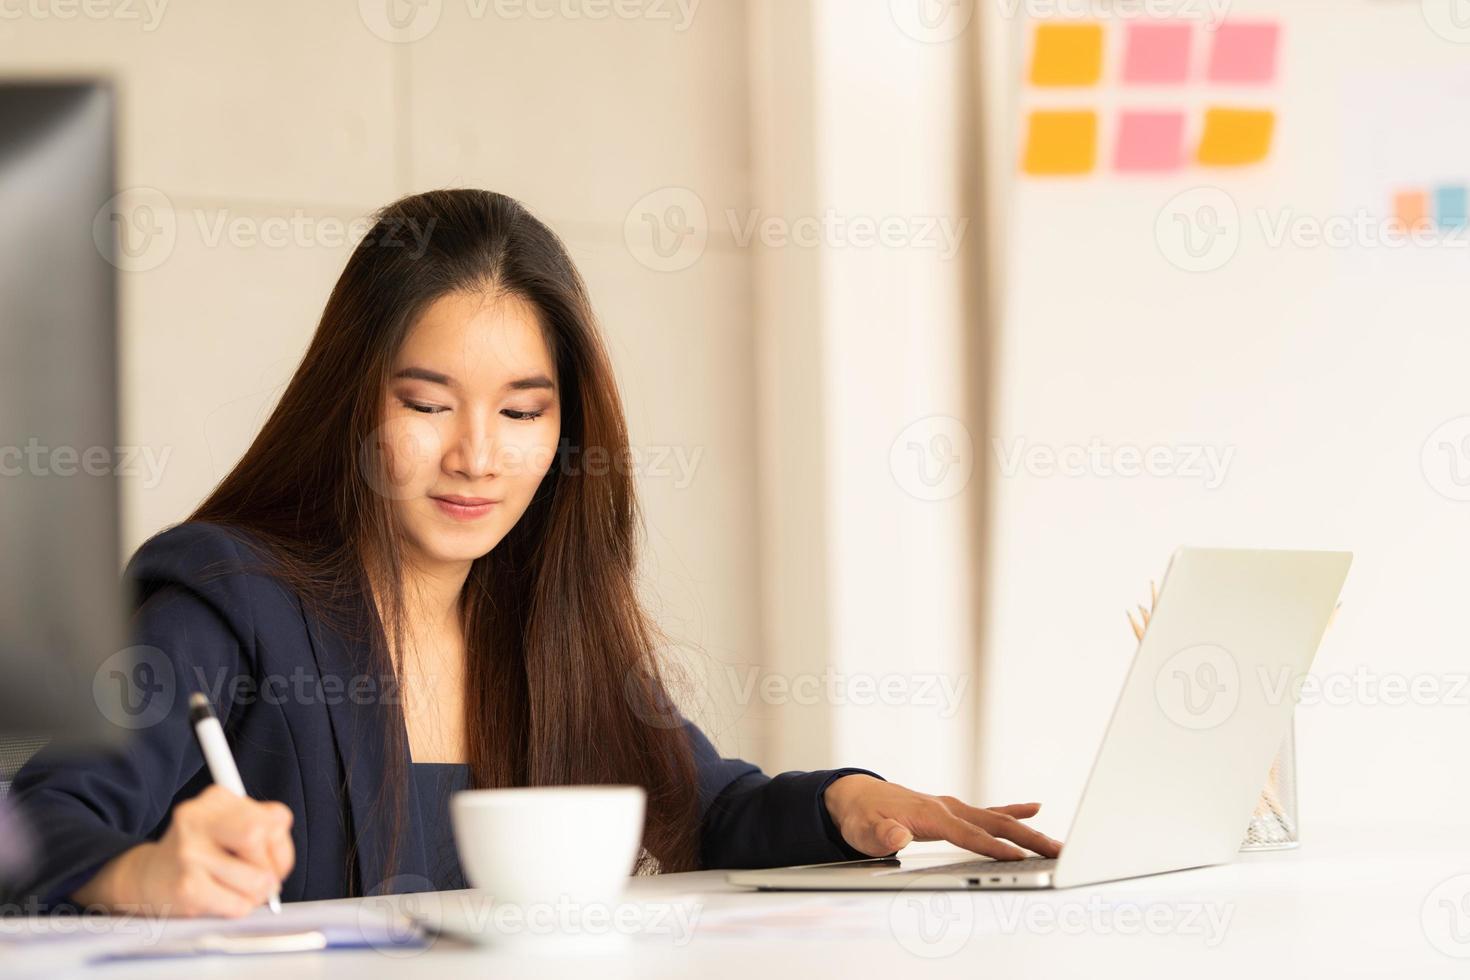 Asian business woman working on laptop photo